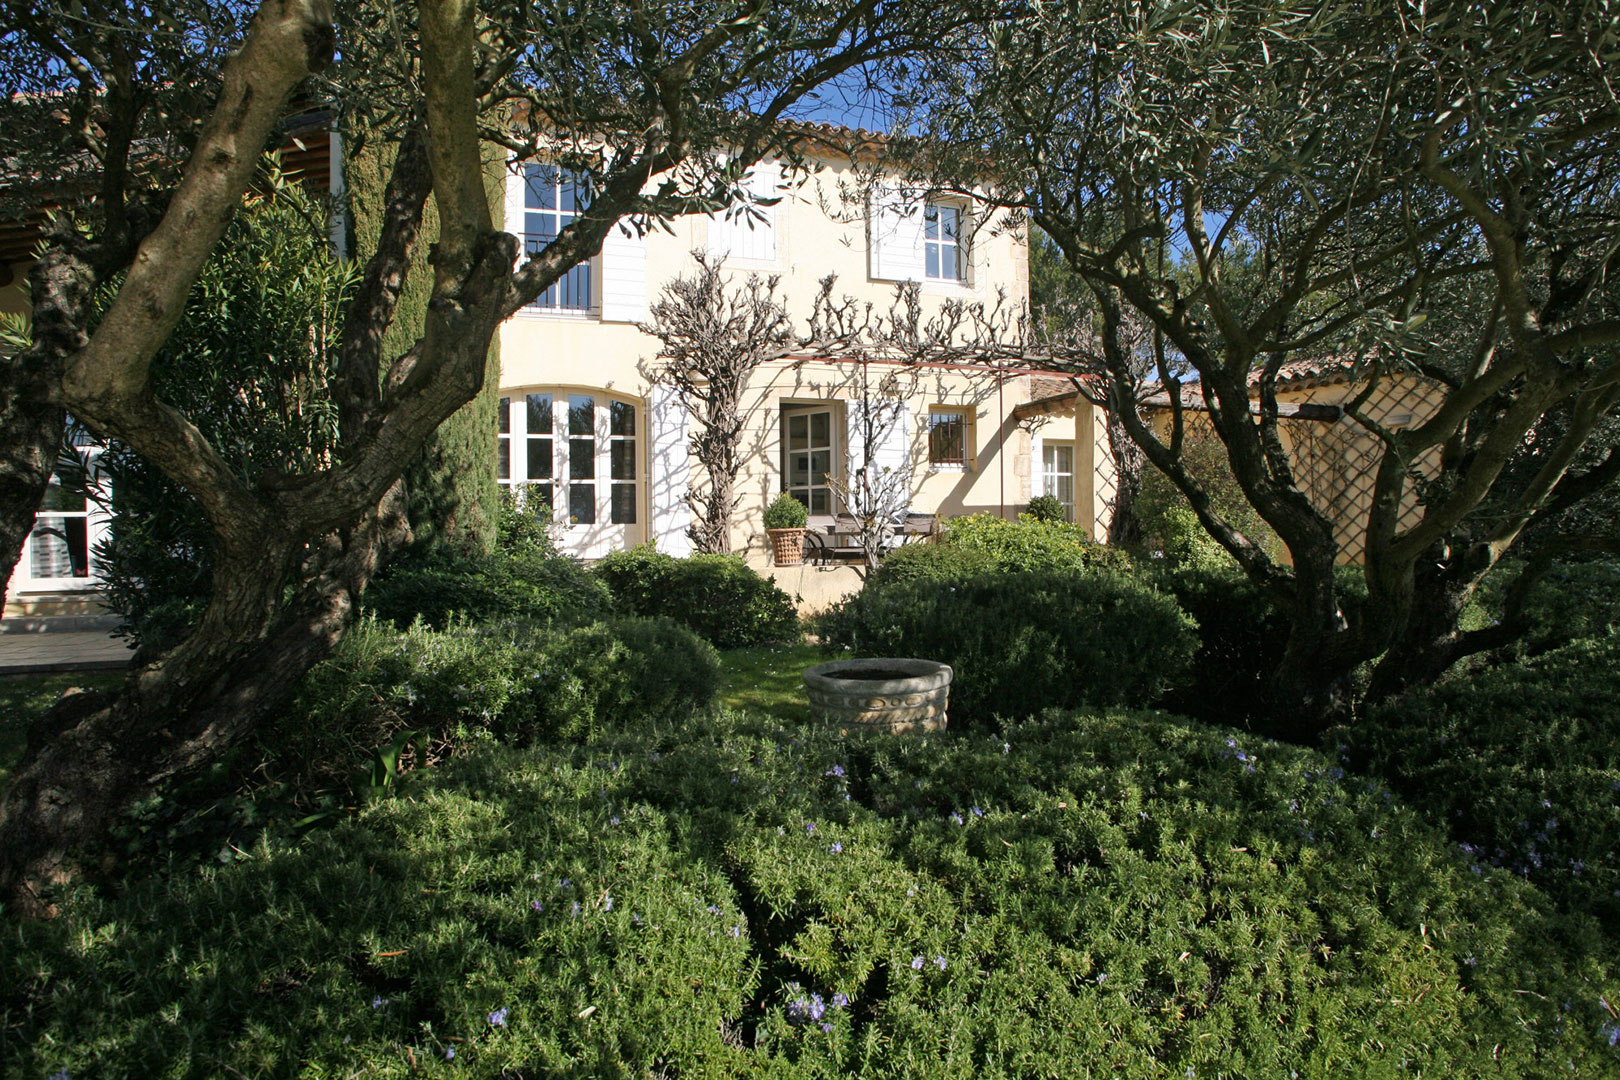 CABRIERES D’AVIGNON, in Provence, Stone house to rent with pool over a beautiful garden